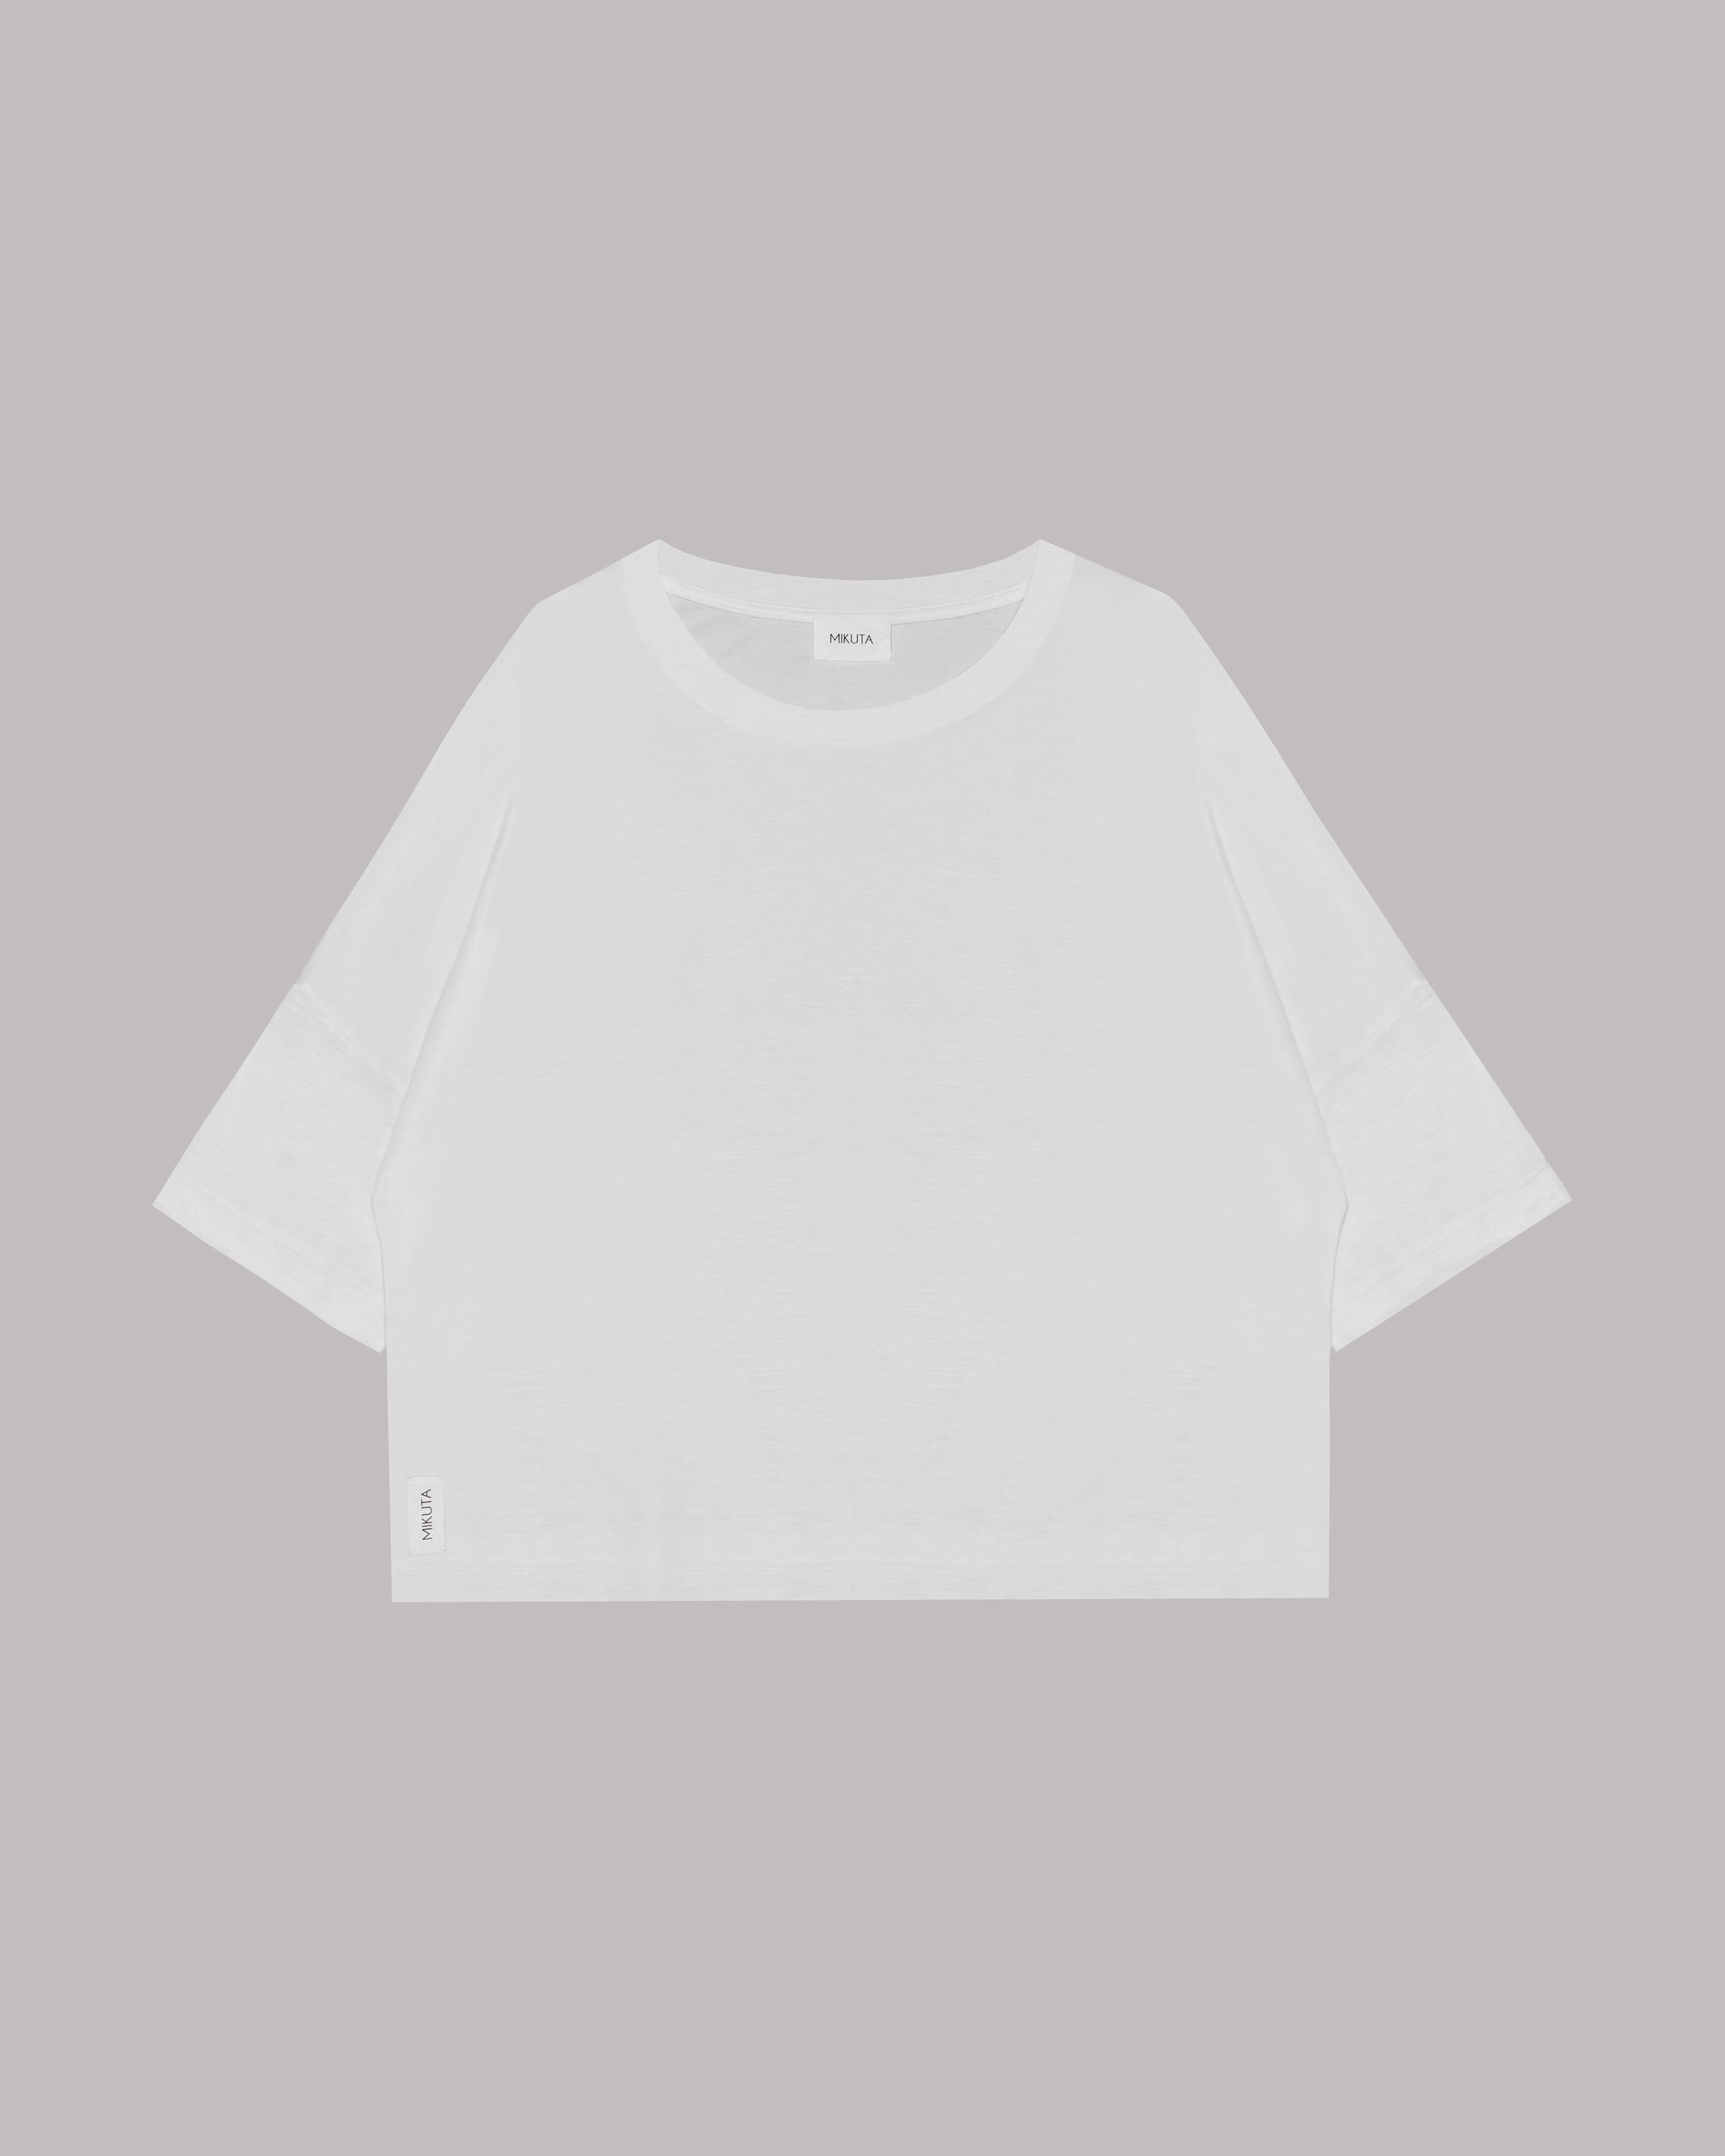 The White Loose Lyocell T-Shirt